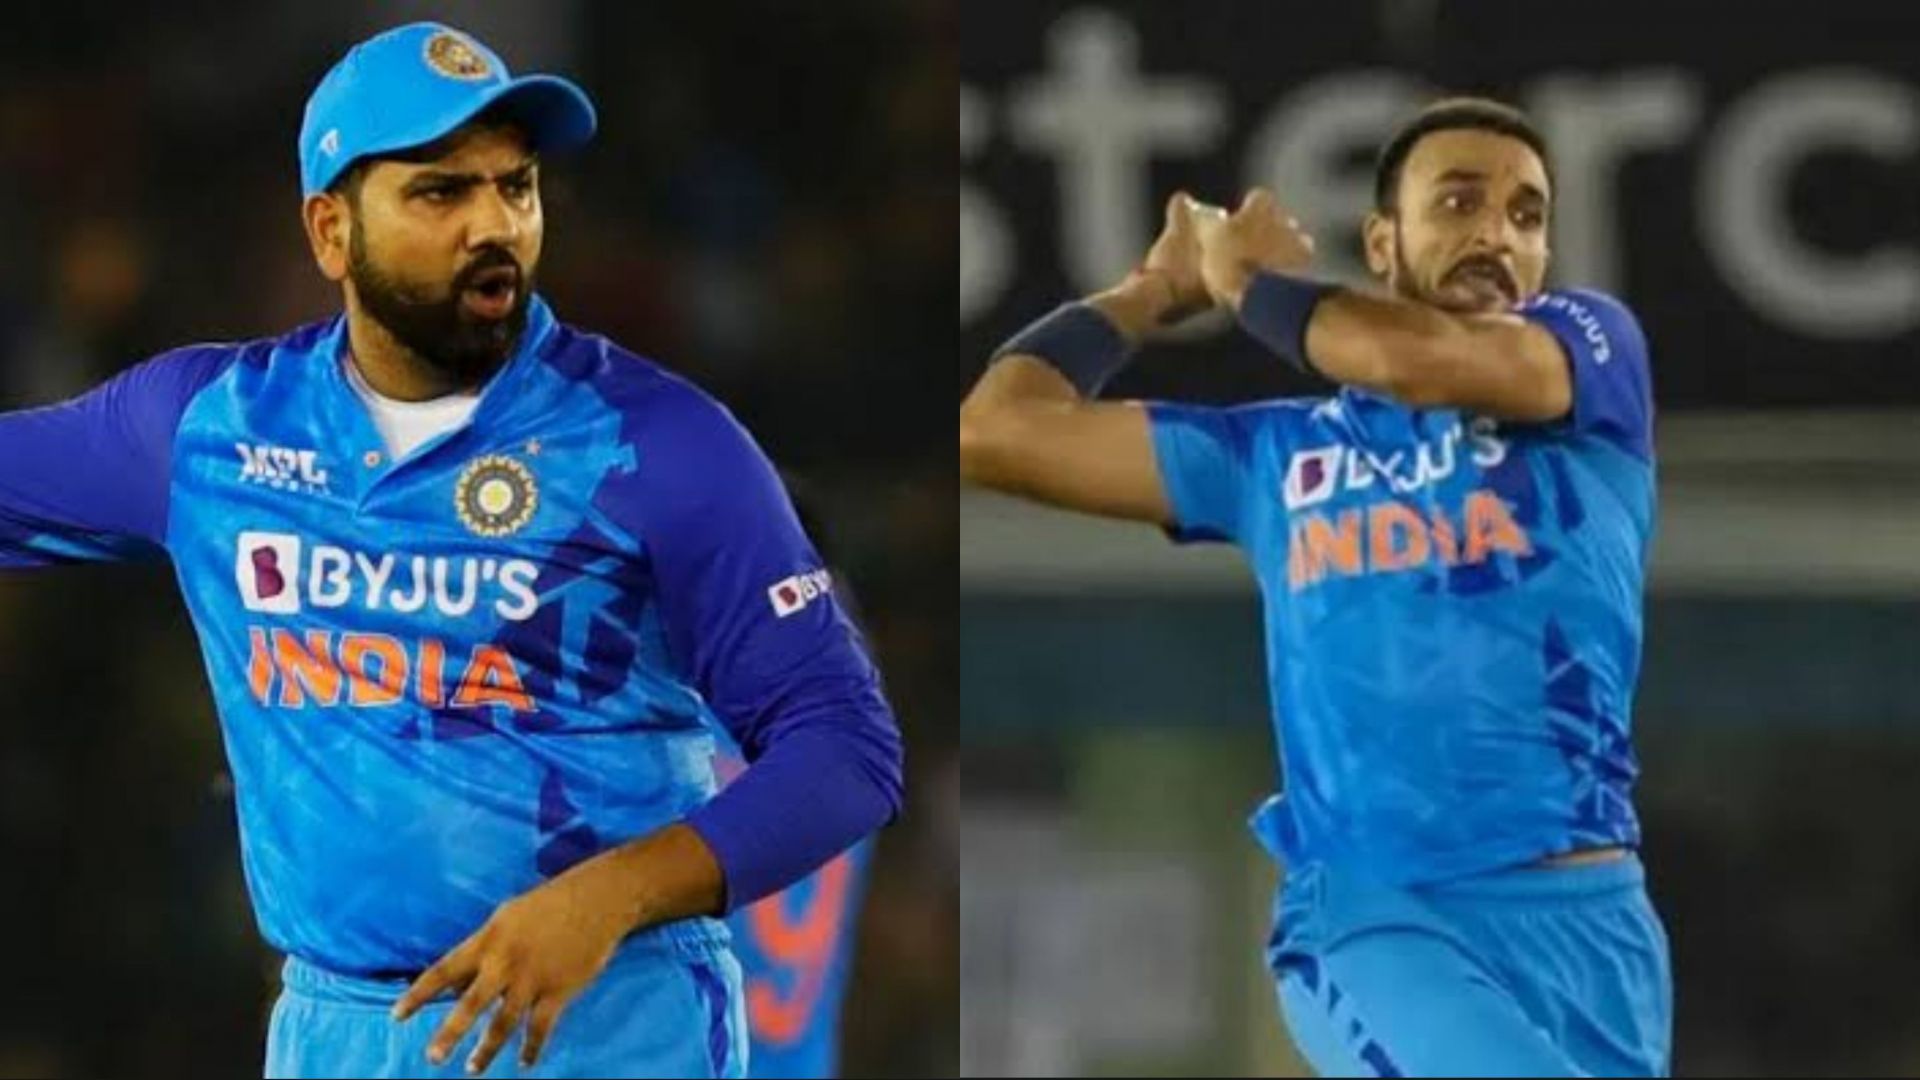 Rohit Sharma and Harshal Patel could not impress much